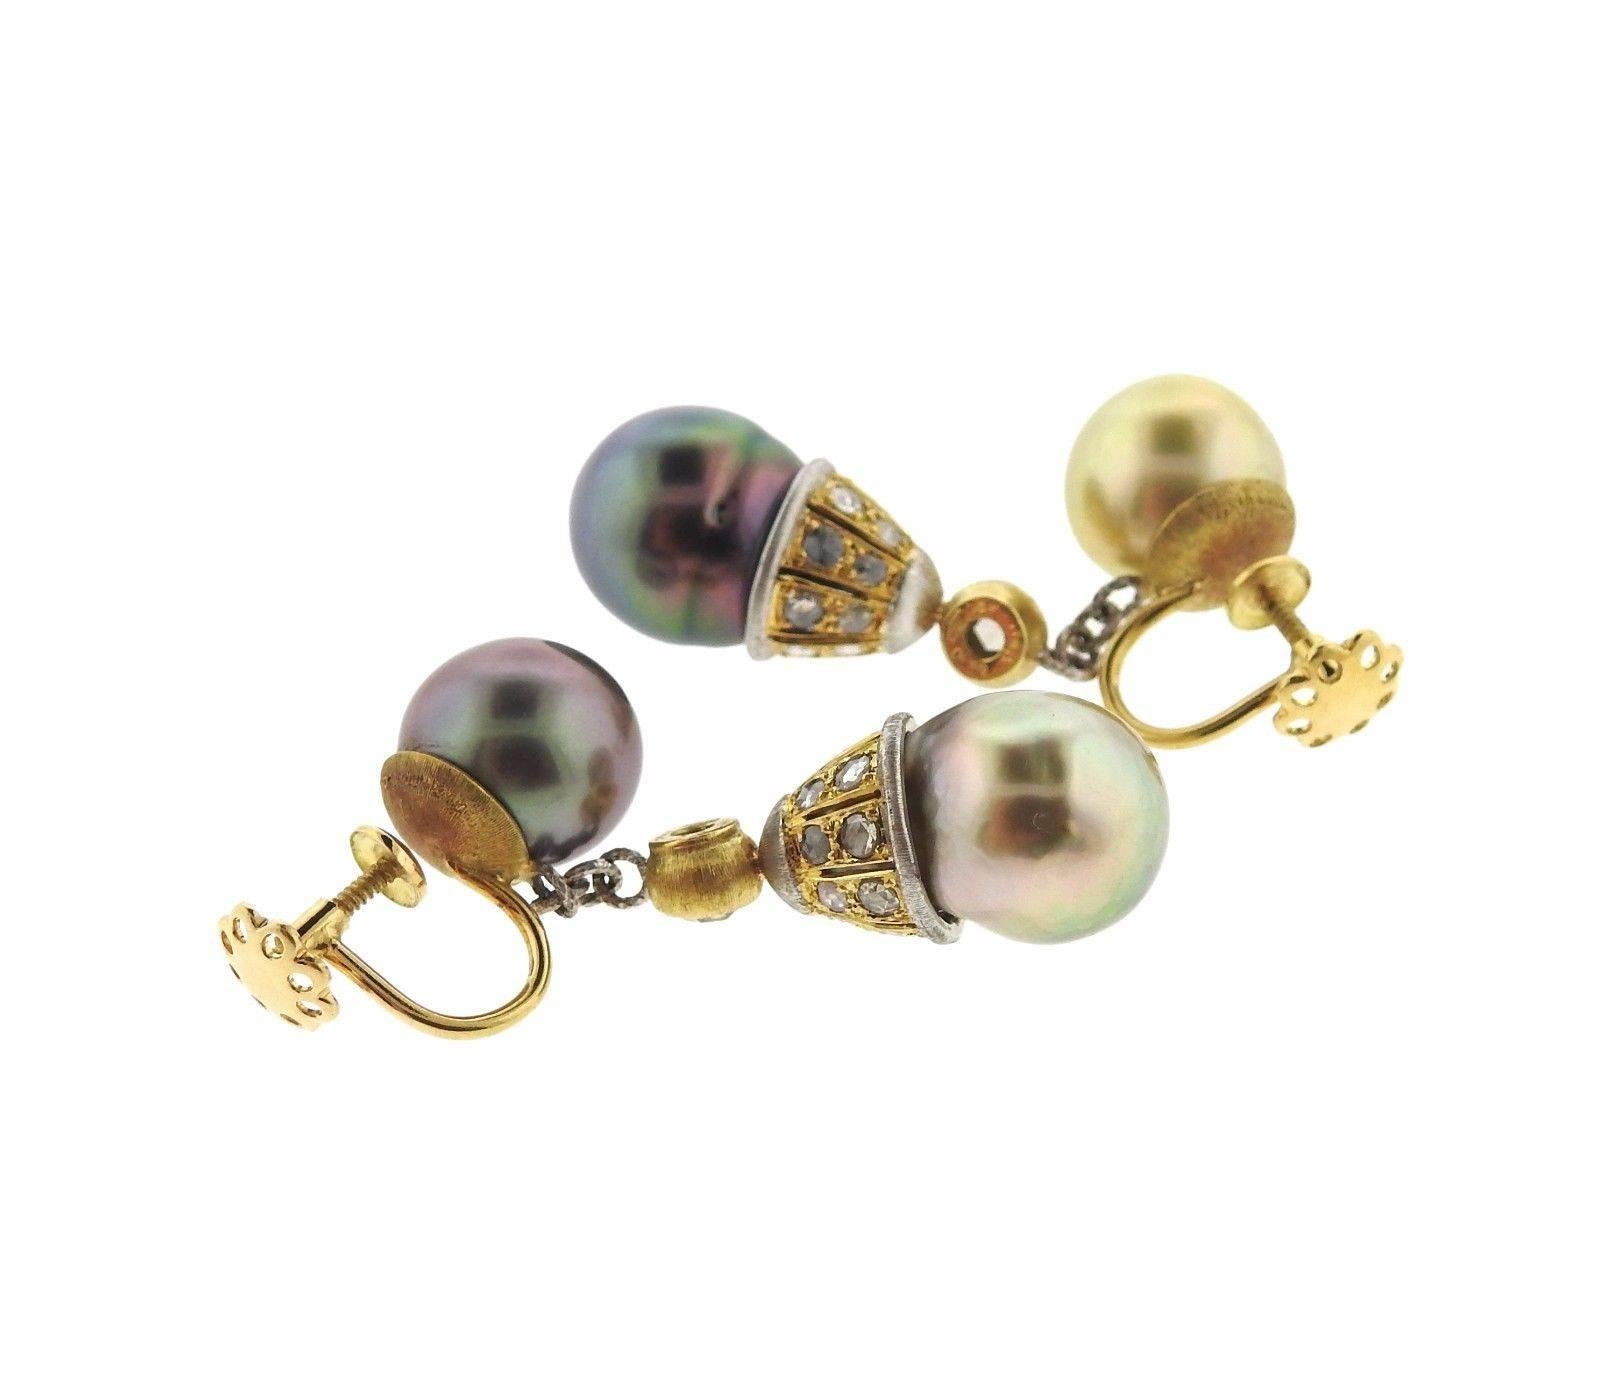 A pair of 18k gold earrings set with 11 - 11.5mm pearls and rose cut diamonds.  The earrings measure 44mm x 11.5mm and weigh 16.1 grams.  Marked:	Gianmaria Buccellati 18KT Italy 750.  The retail is $13380.